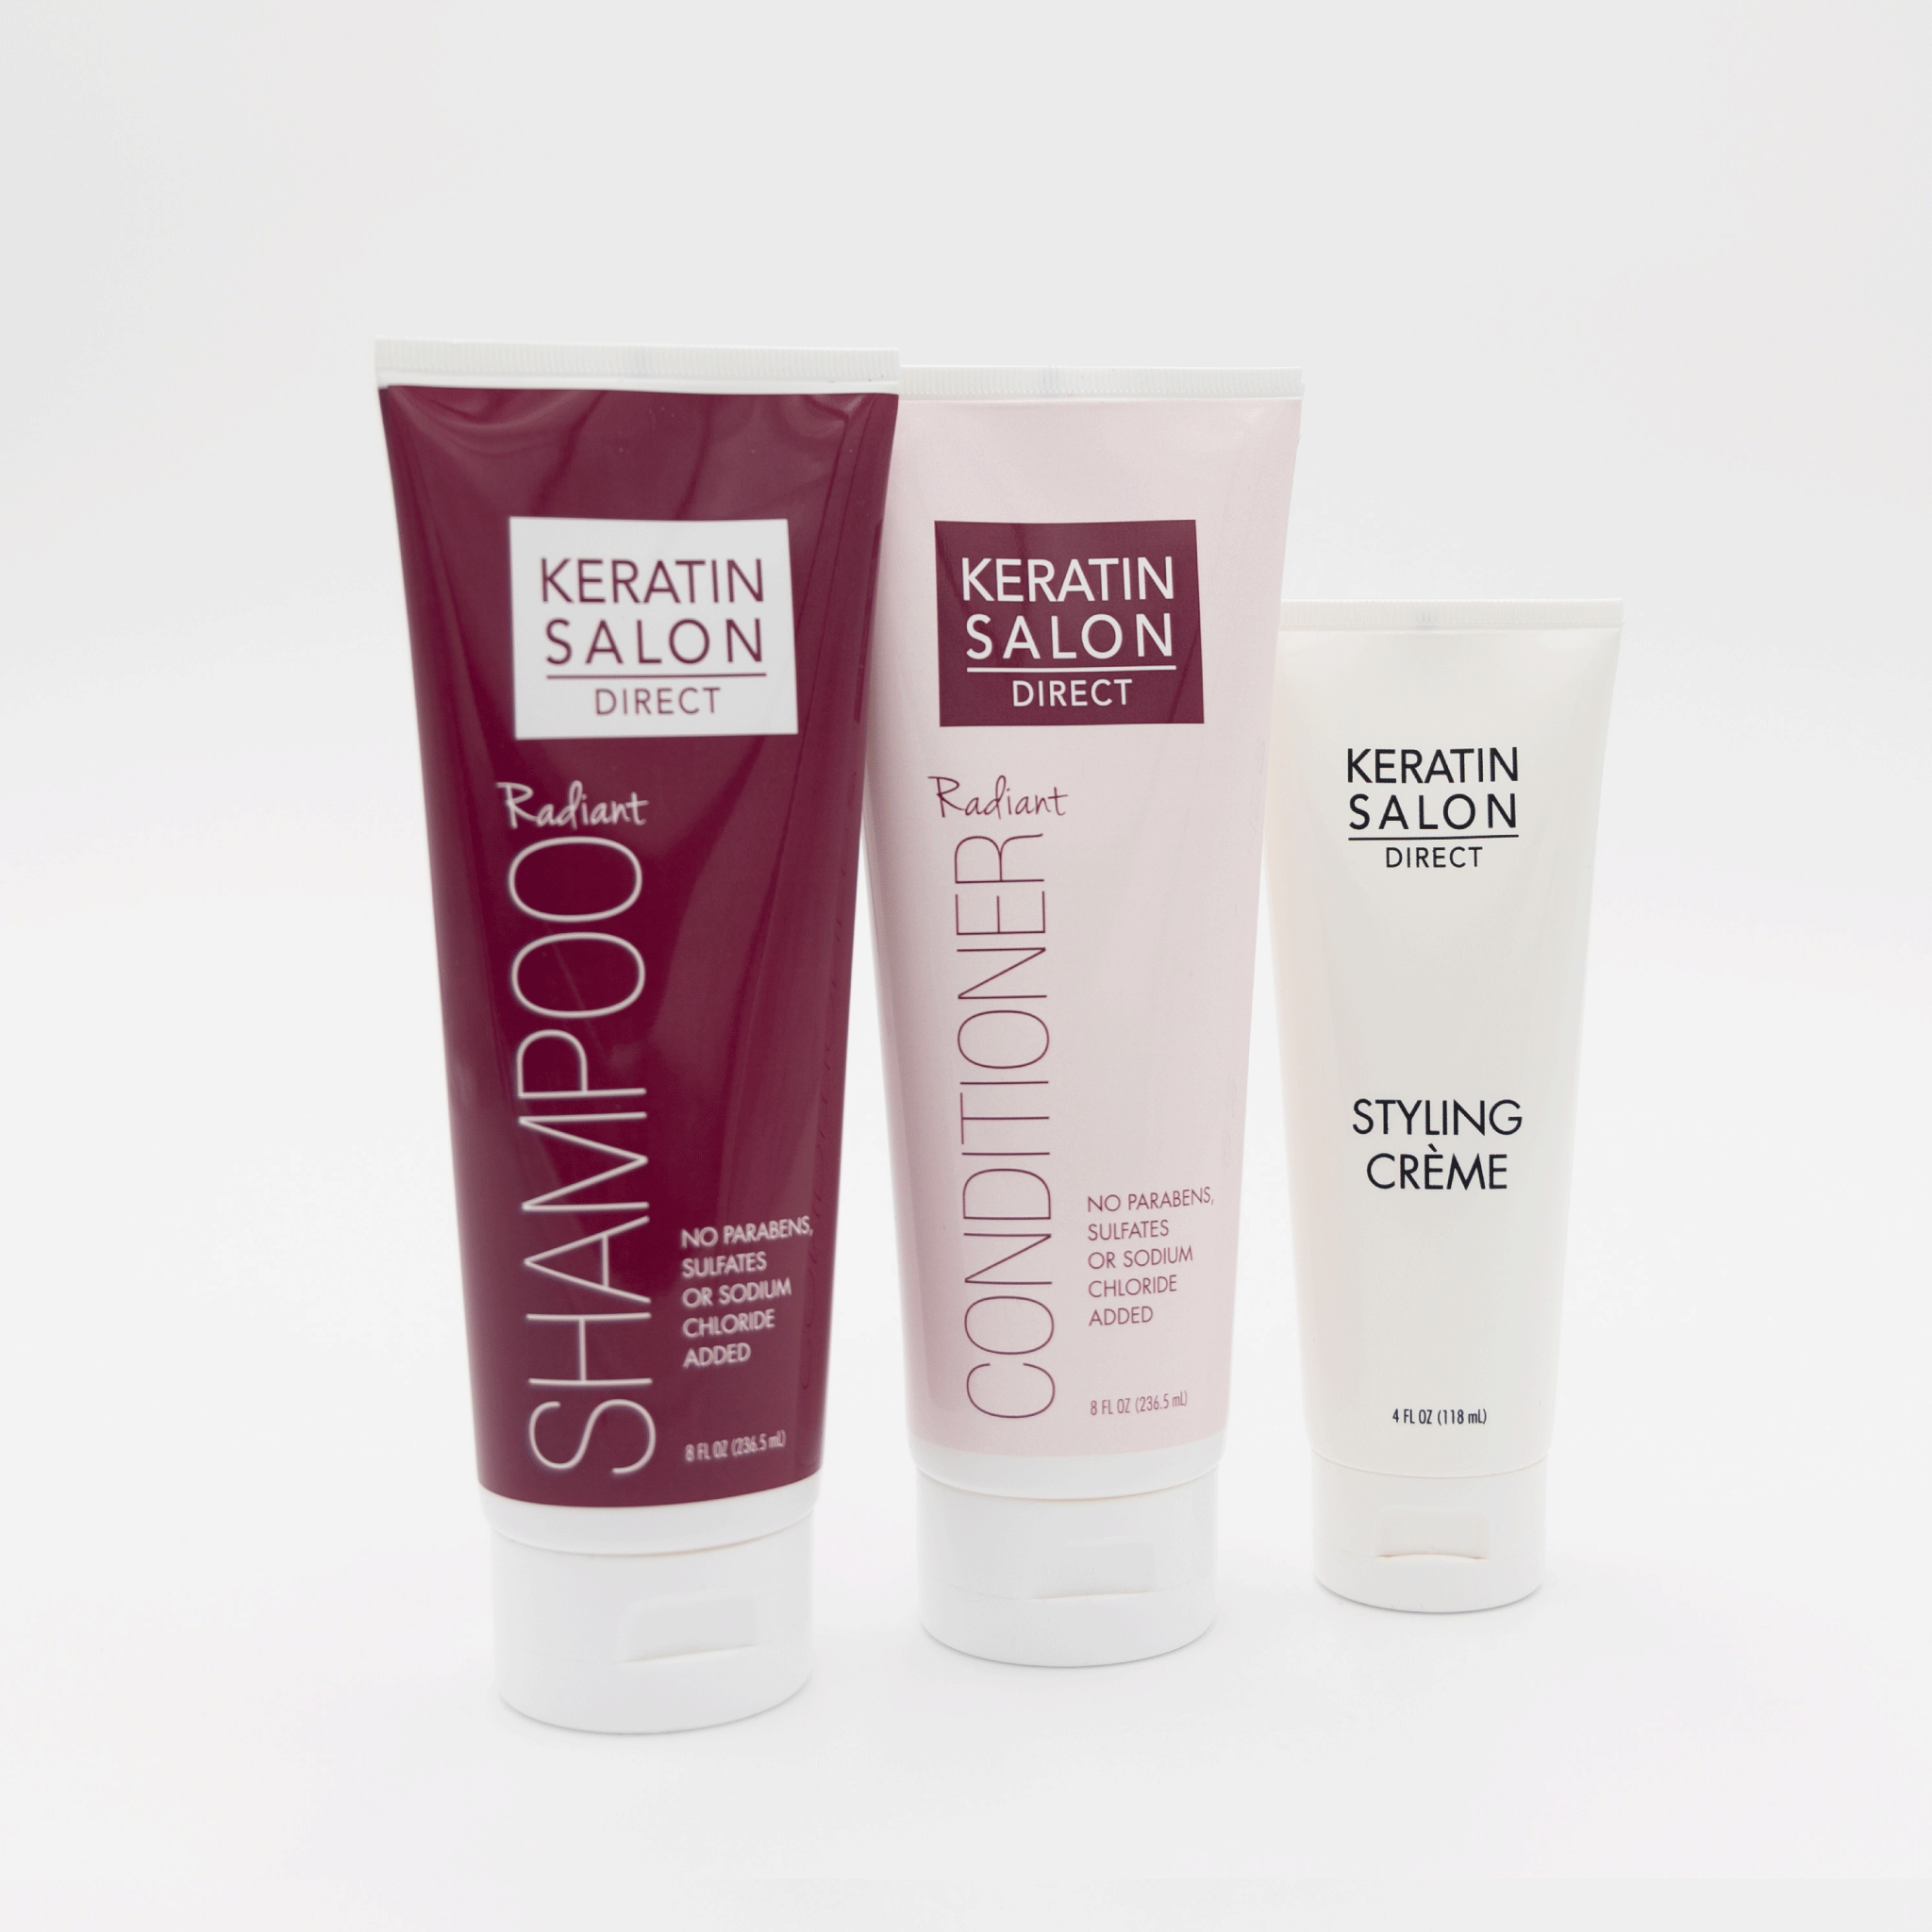 Radiant Shampoo & Conditioner AND Styling Creme